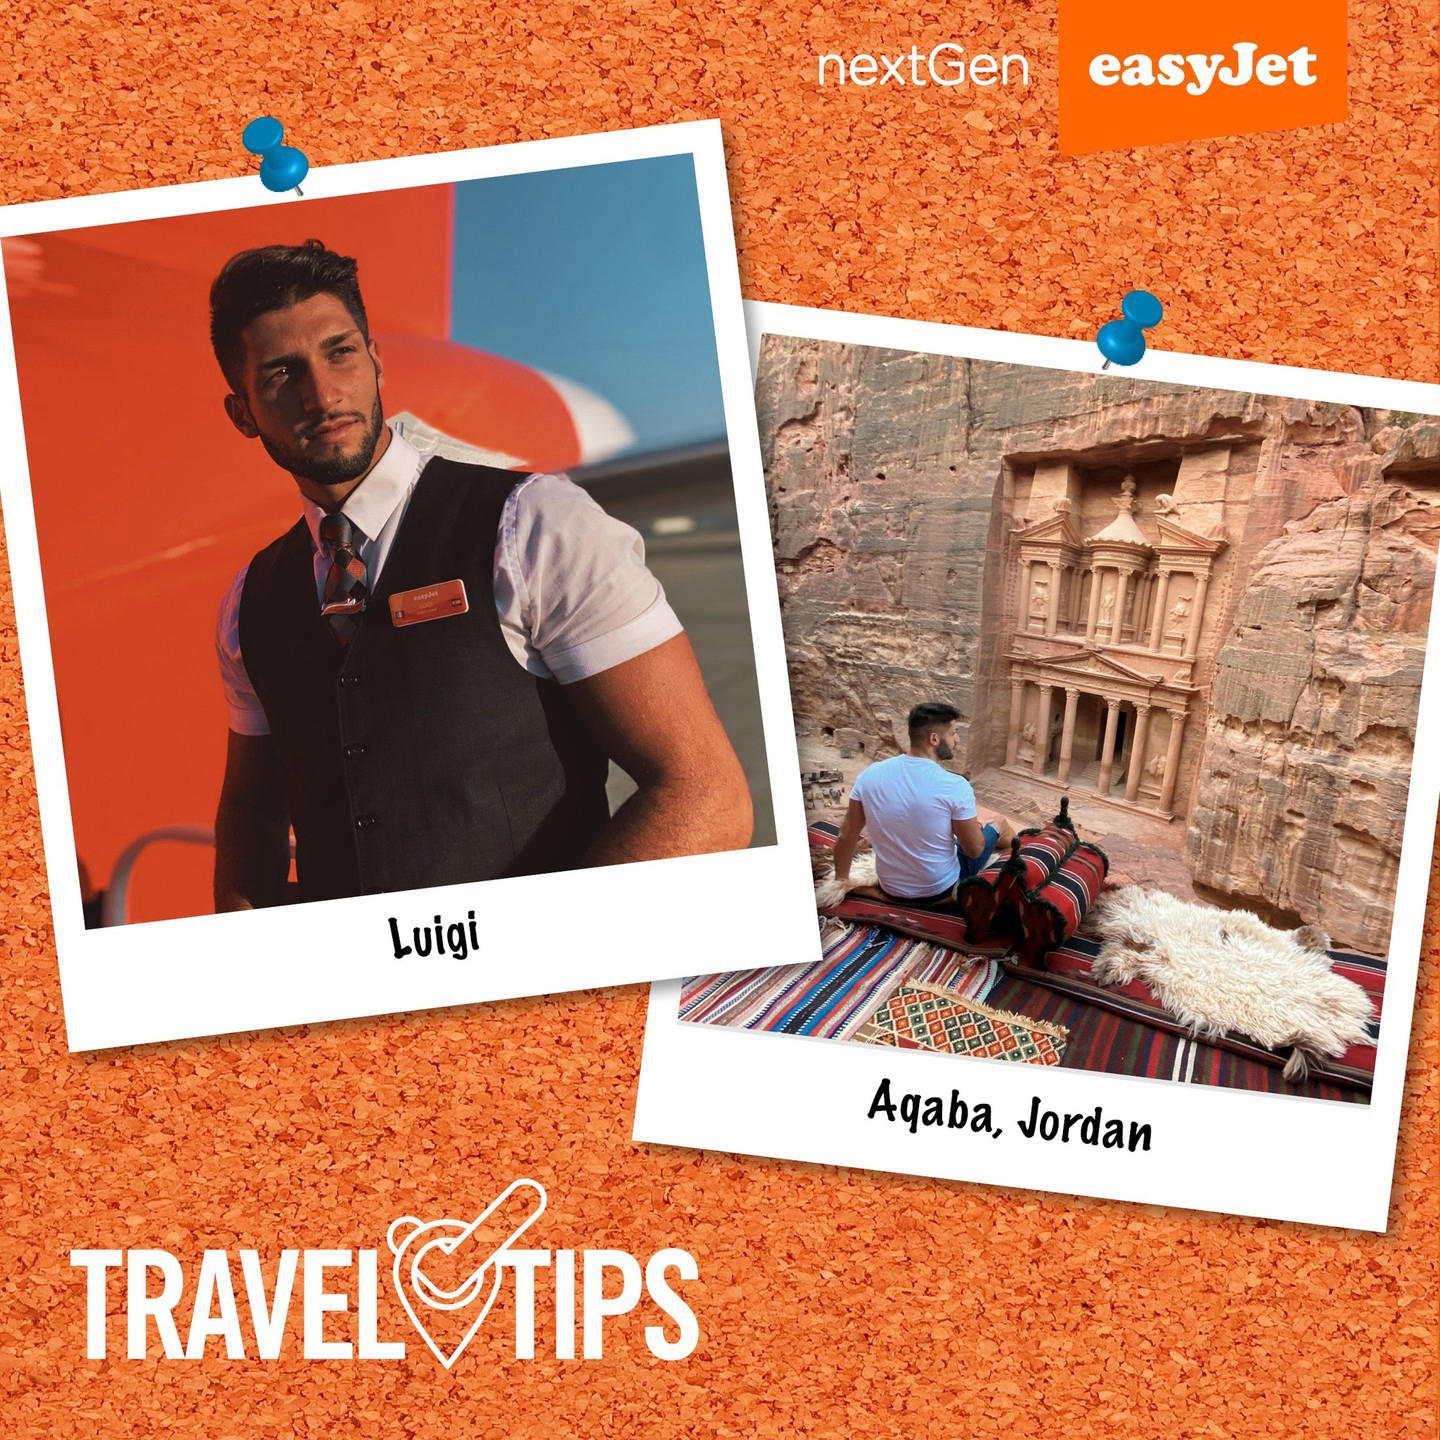 image  1 easyJet - “There are several good reasons why I’d recommend Jordan